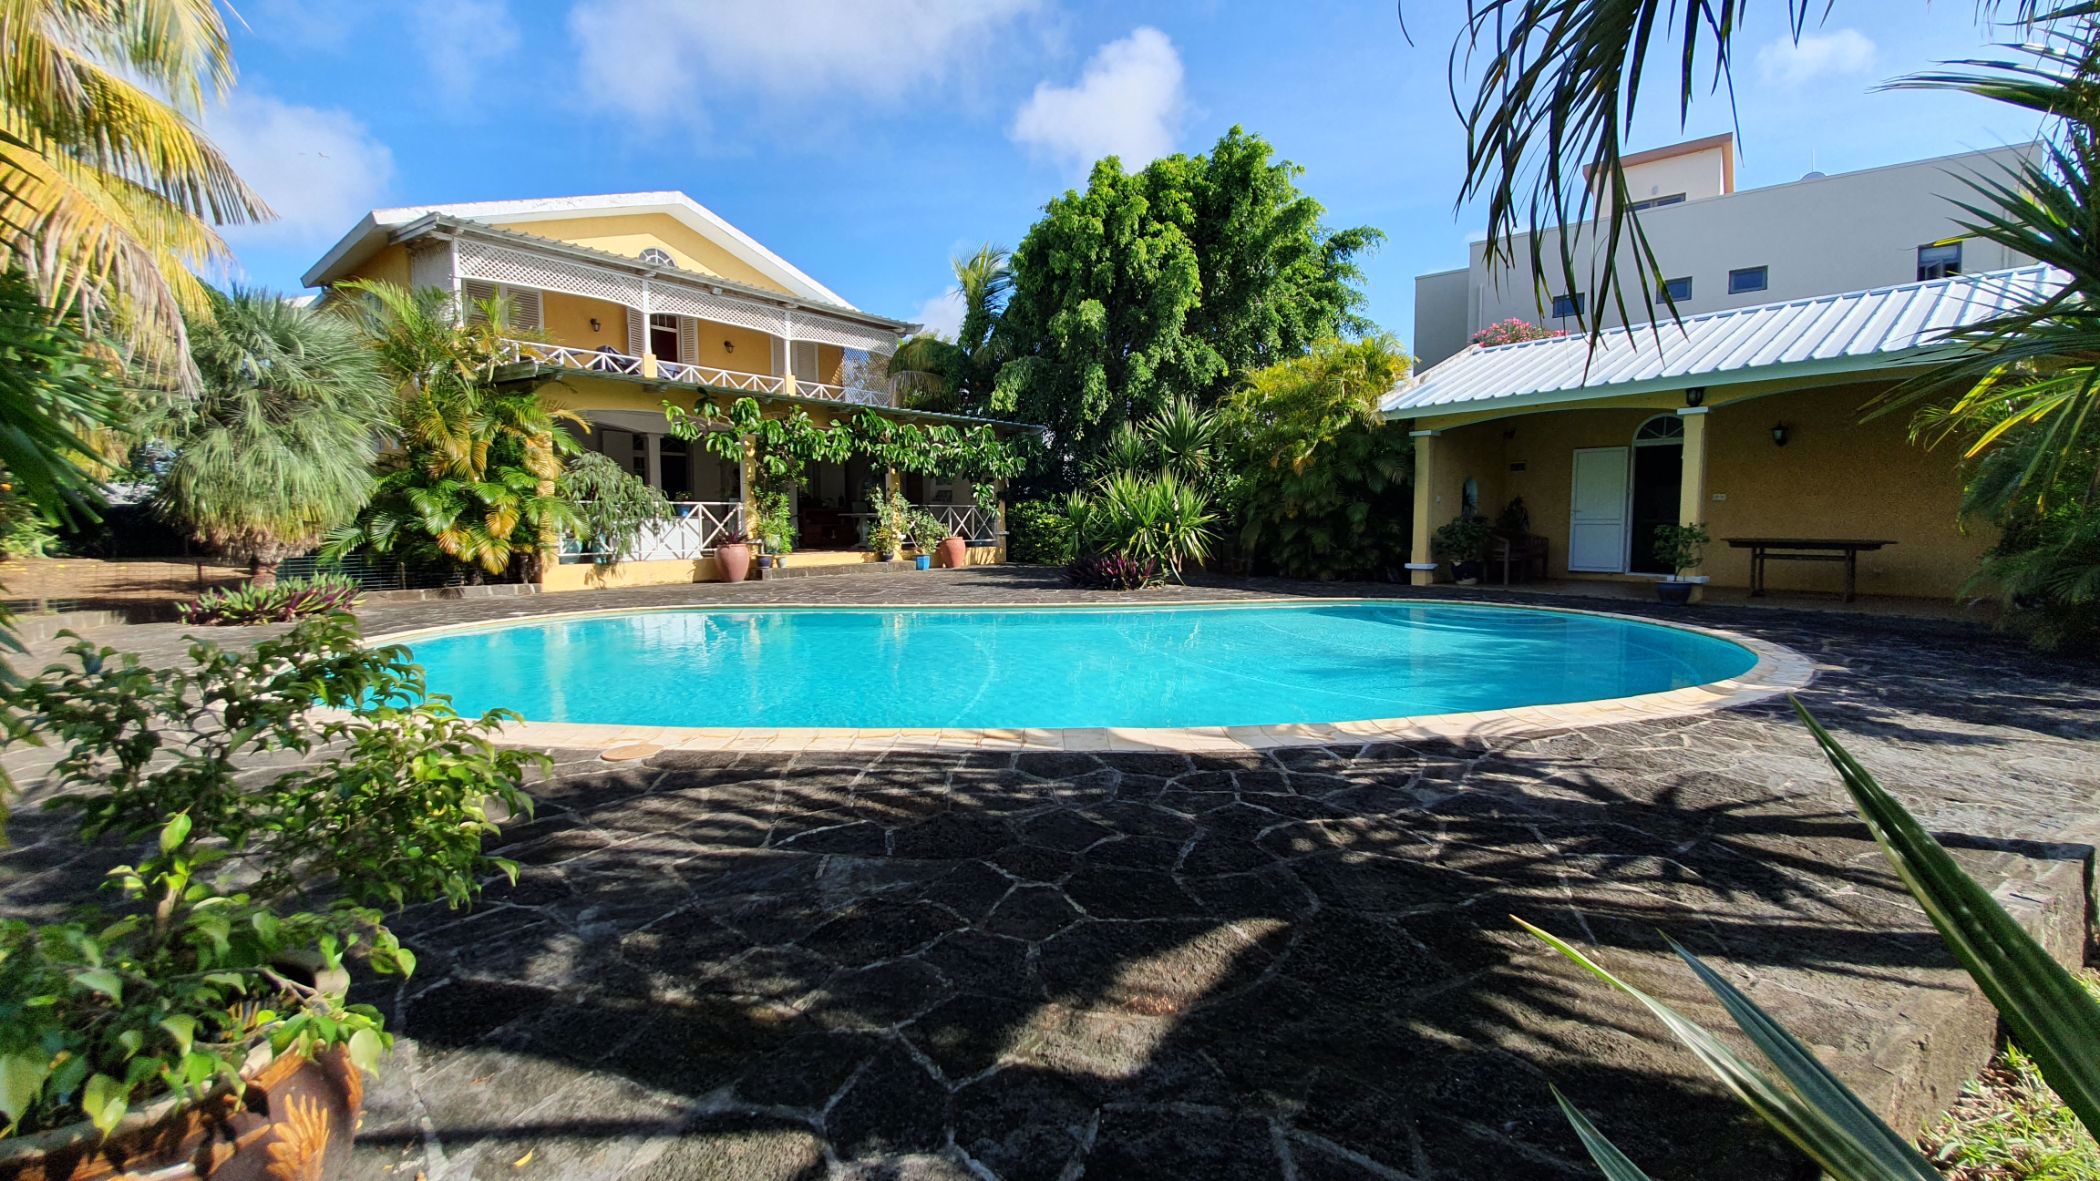 4 bedroom house for sale in Calodyne (Mauritius)